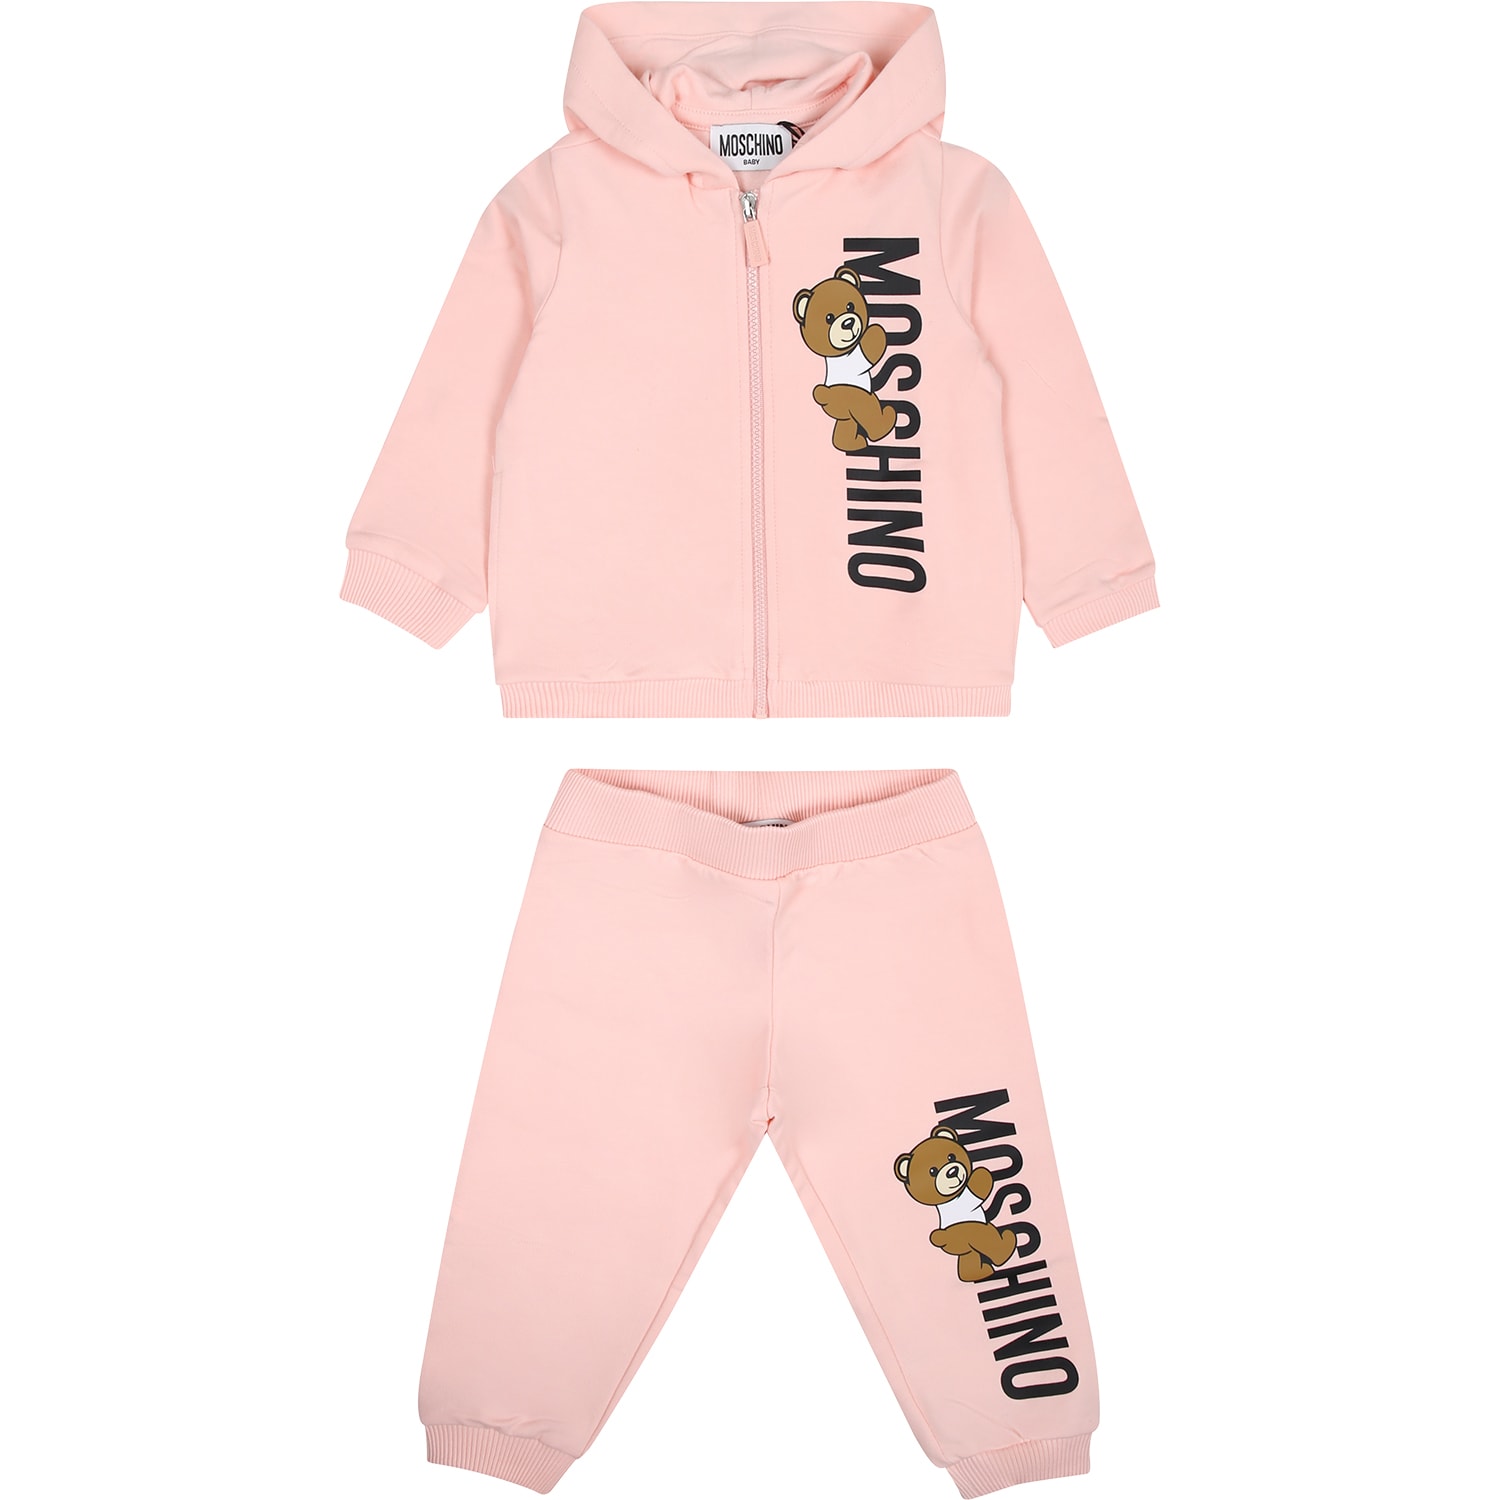 Moschino Pink Set For Baby Girl With Teddy Bear And Logo